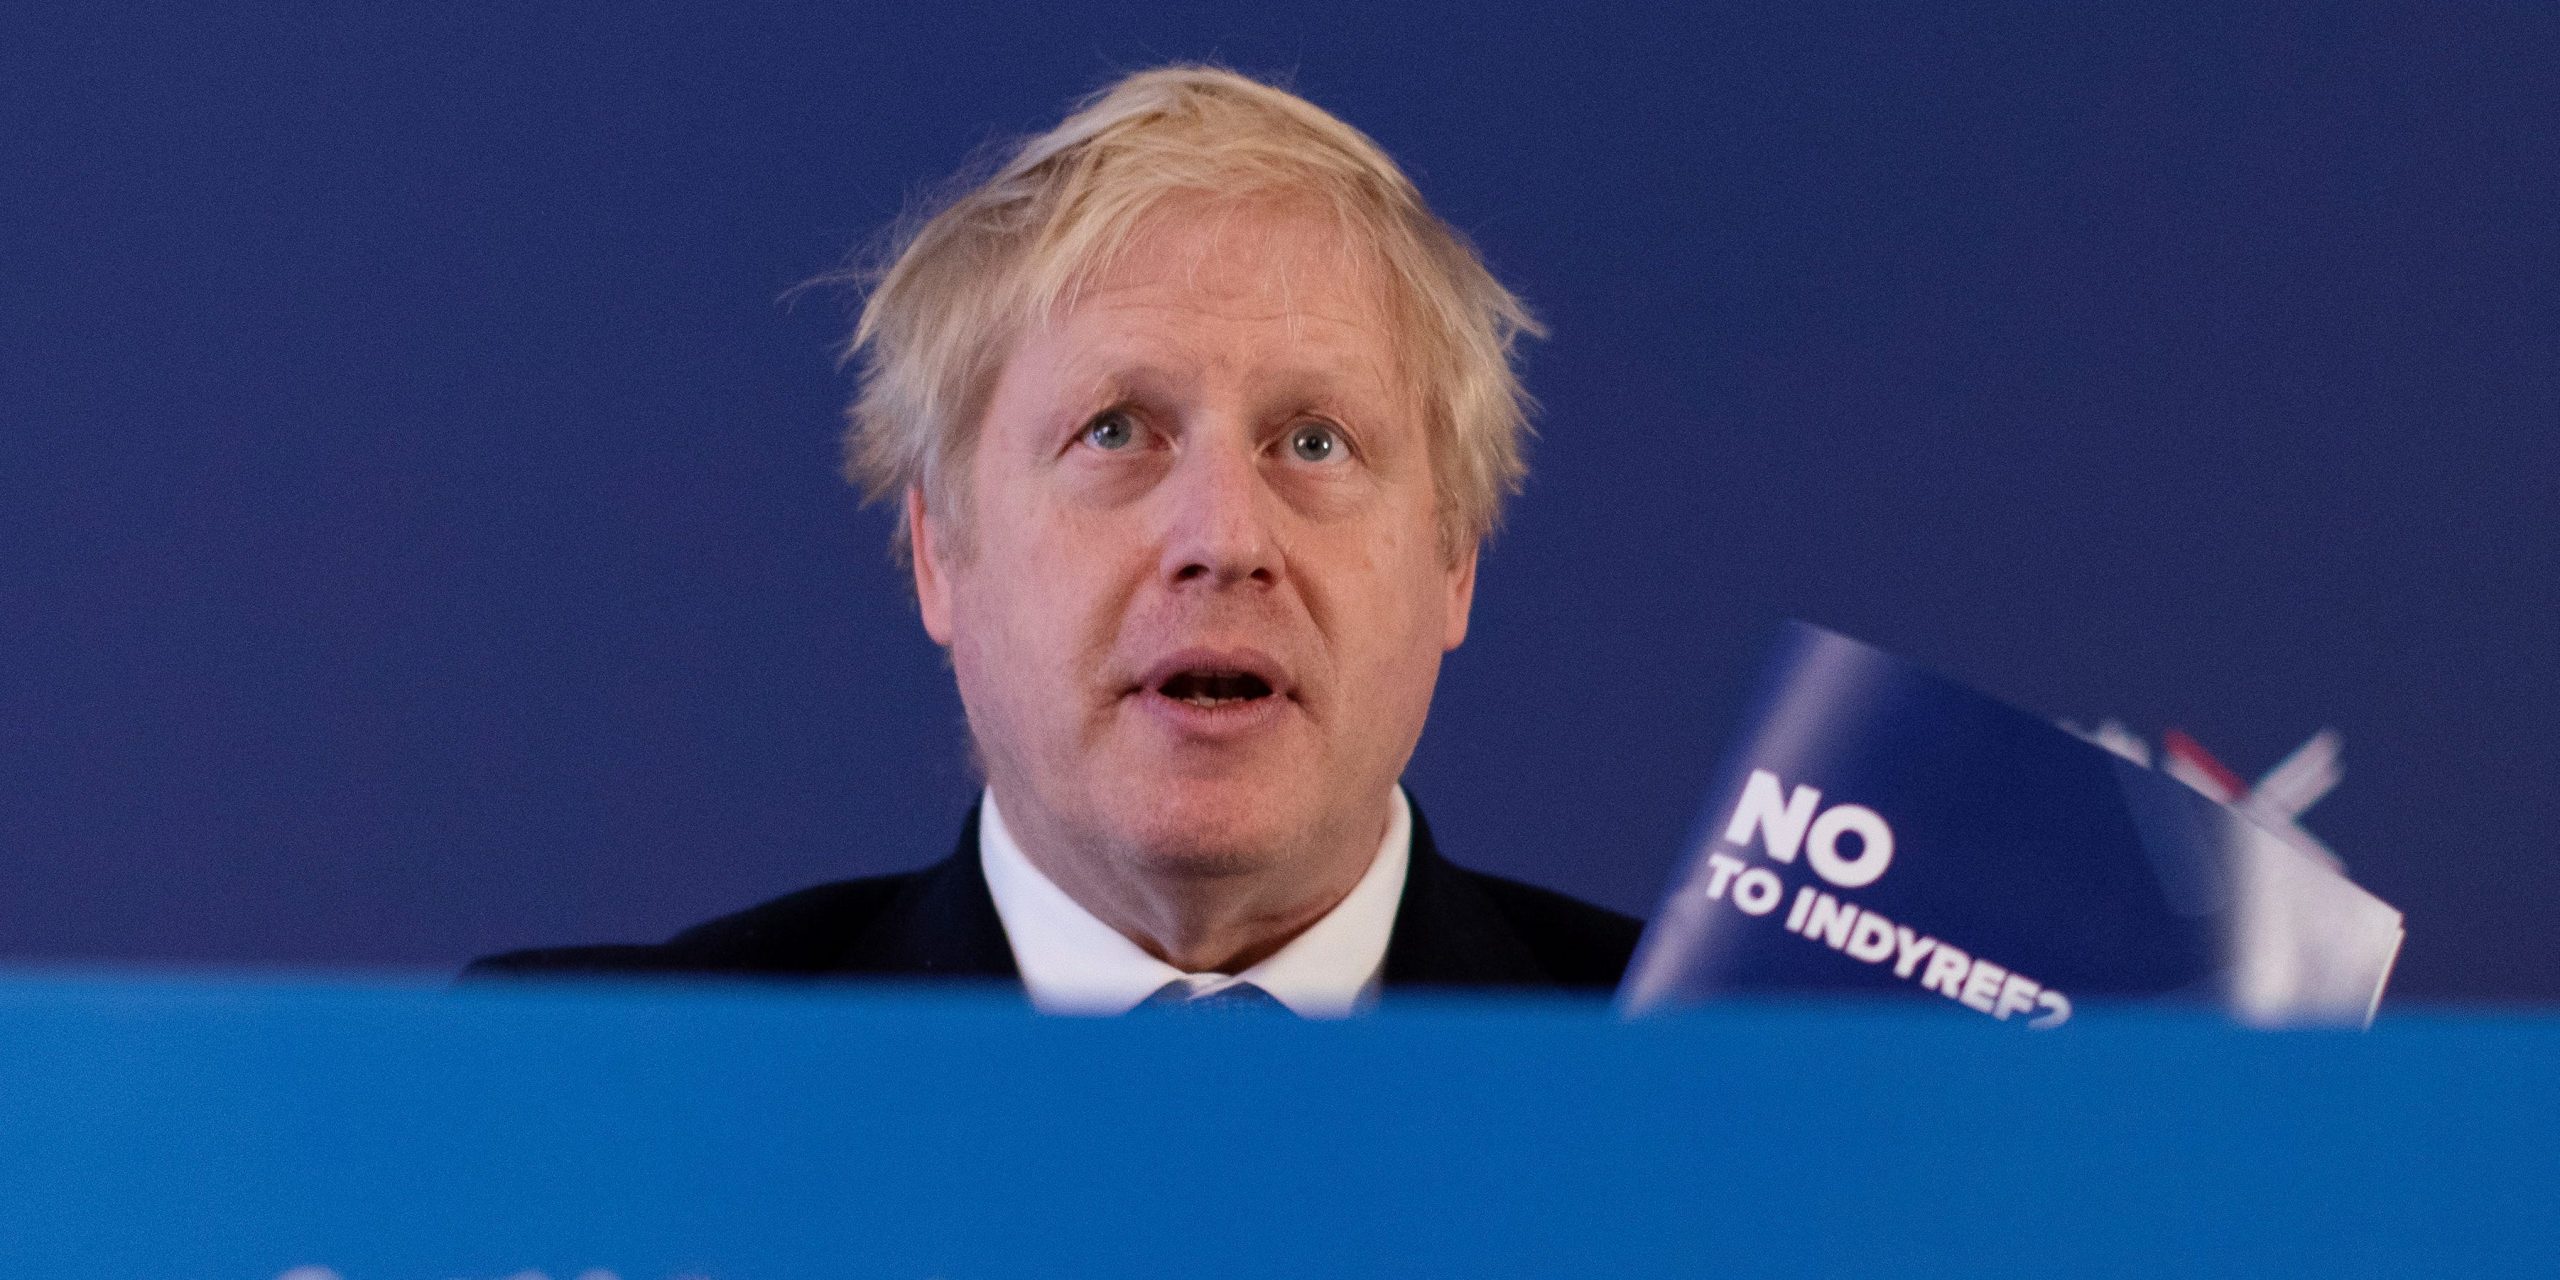 UK Prime Minister and Conservative Party leader, Boris Johnson, launches the Conservative Party Scottish Manifesto on November 26, 2019 in North Queensferry, Scotland.